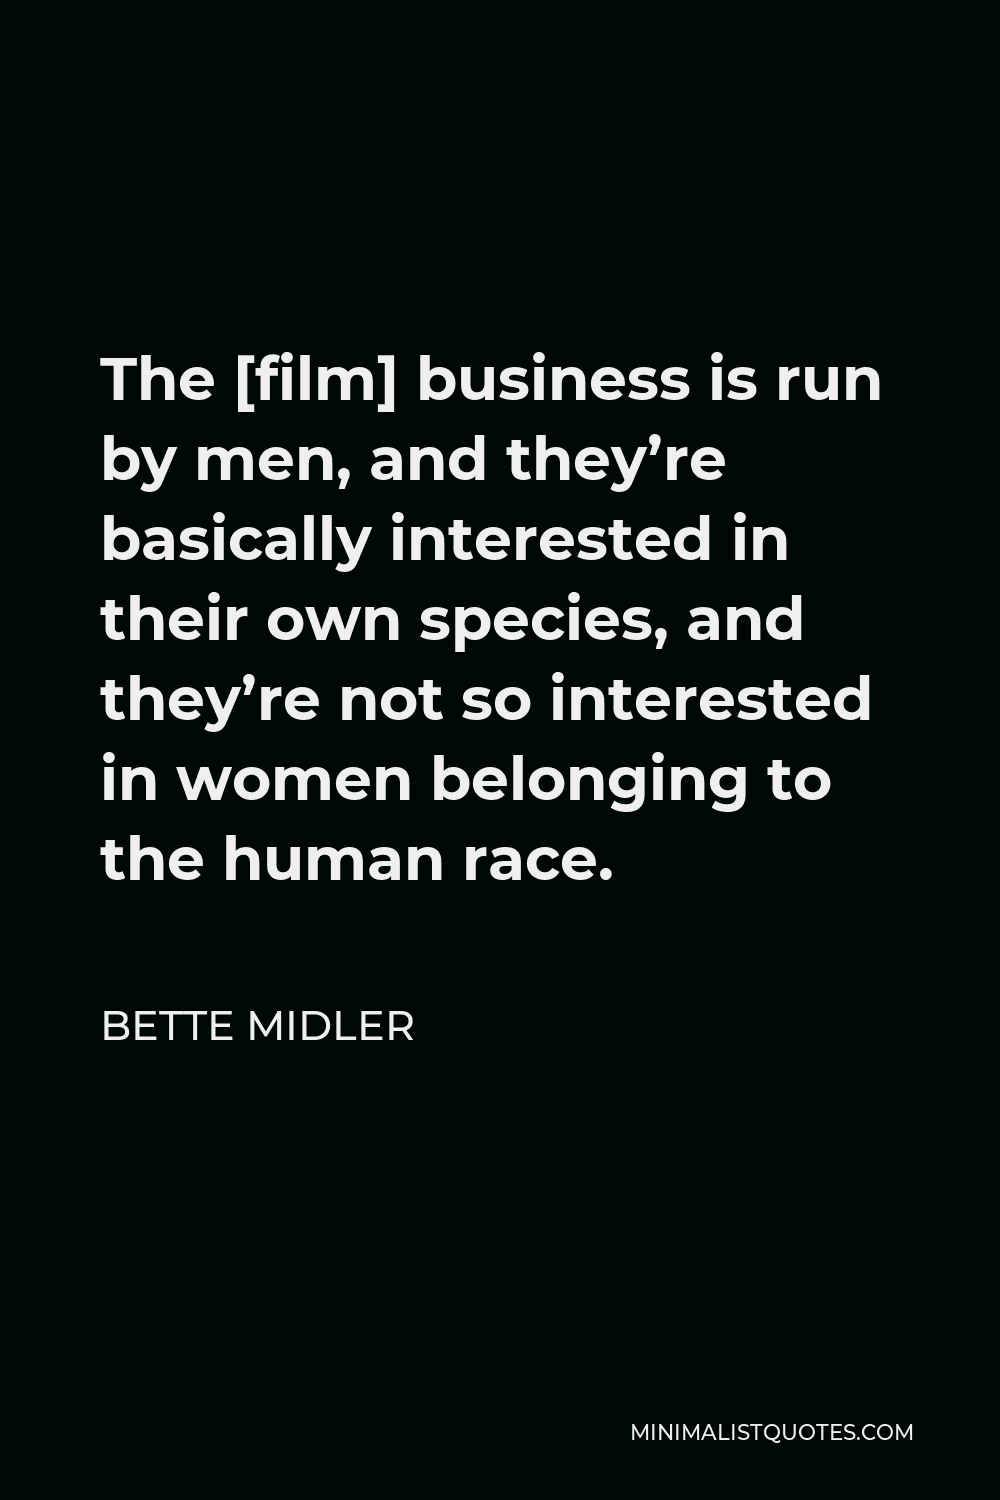 Bette Midler Quote - The [film] business is run by men, and they’re basically interested in their own species, and they’re not so interested in women belonging to the human race.